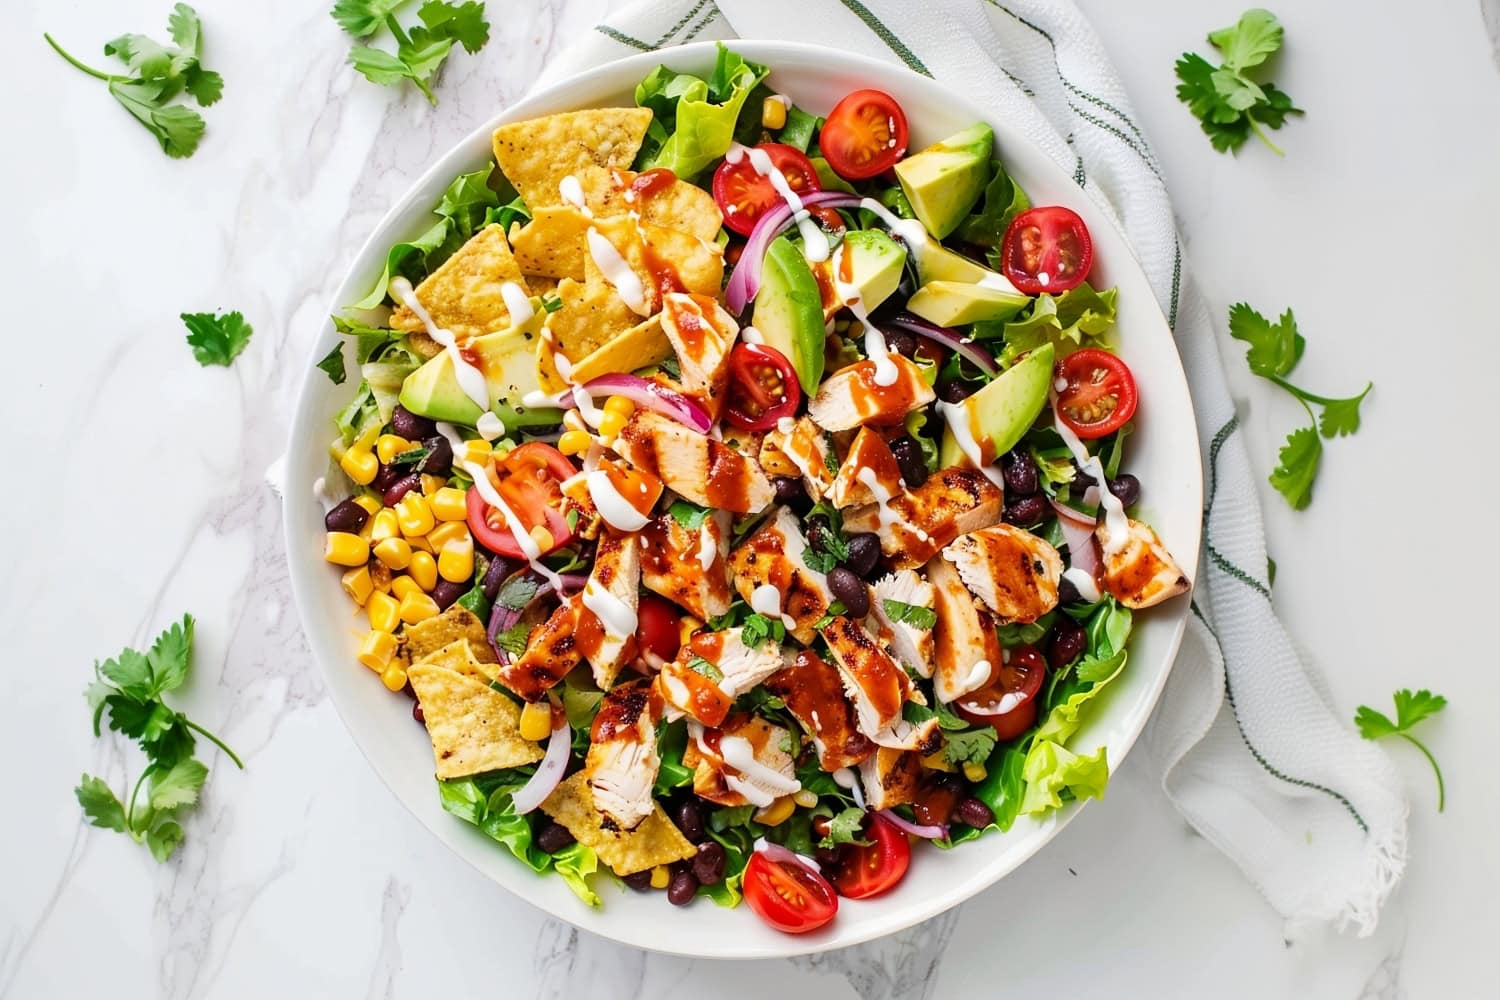 Colorful BBQ chicken salad featuring grilled chicken, black beans, corn, avocado, and cherry tomatoes on a bed of lettuce.